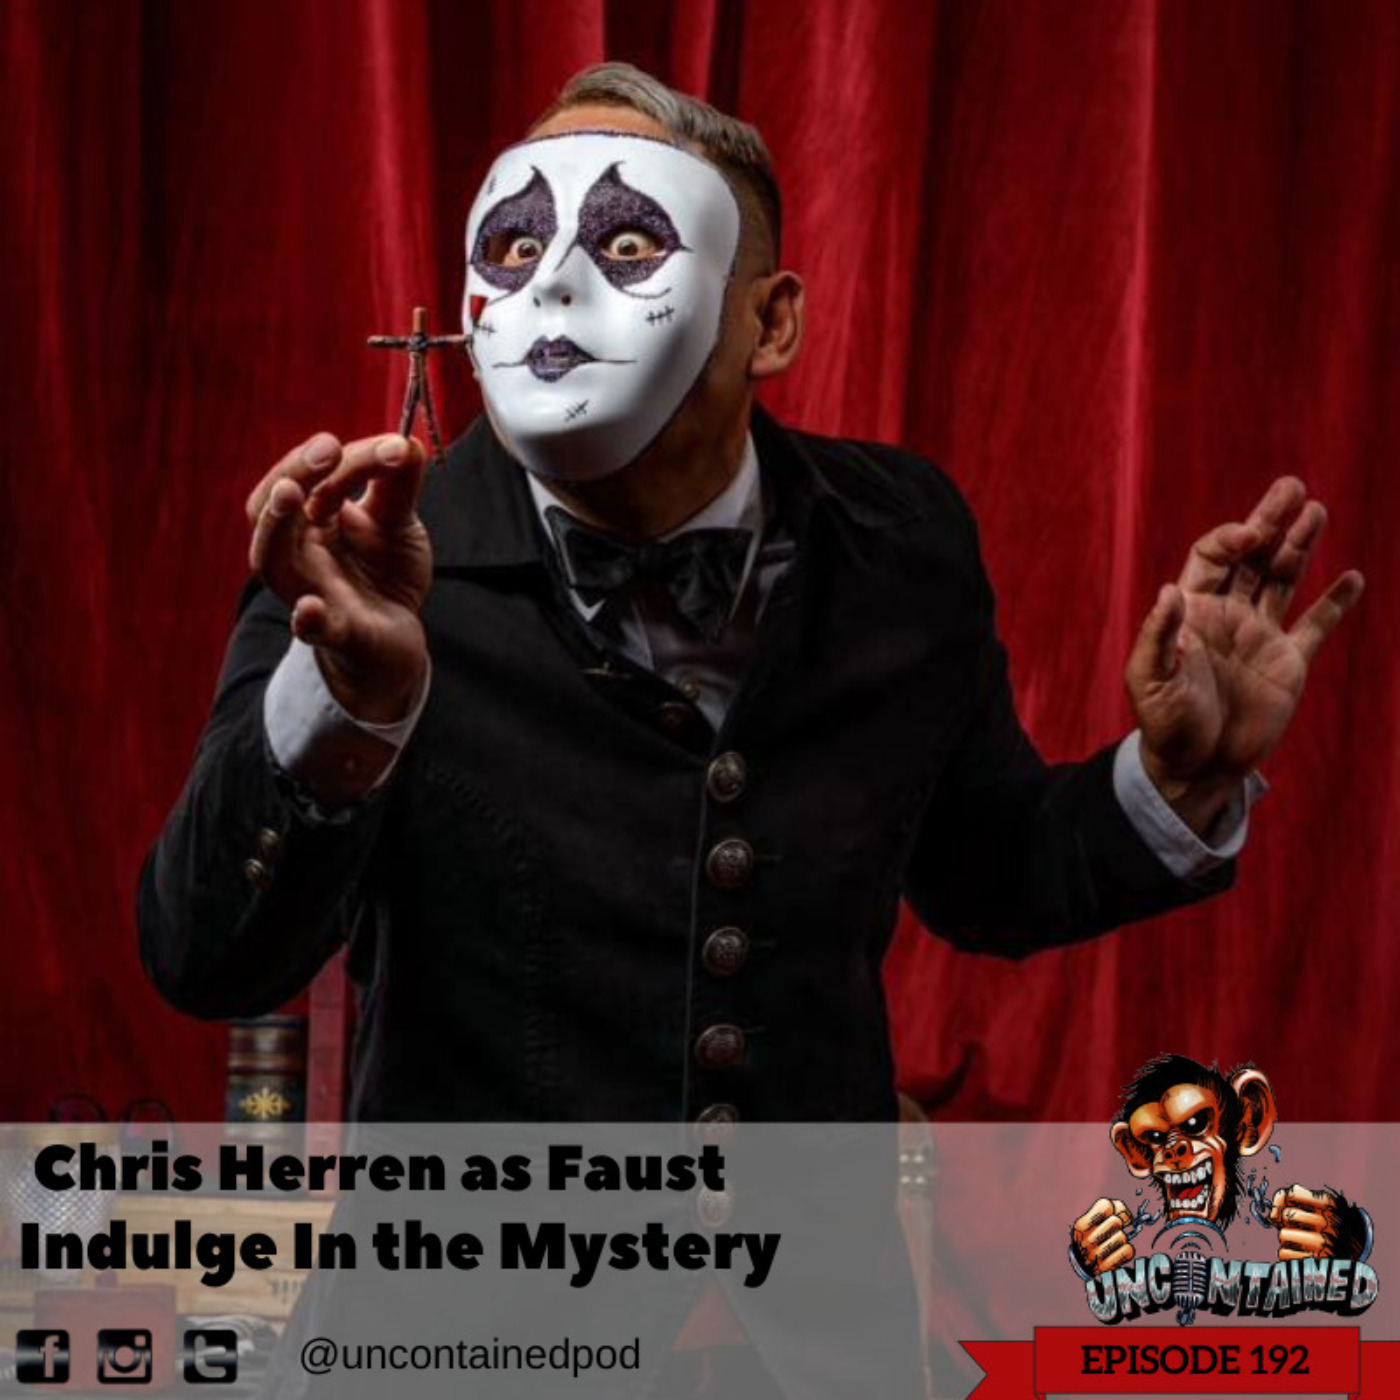 Episode 192: Chris Herren as Faust - Indulge In The Mystery